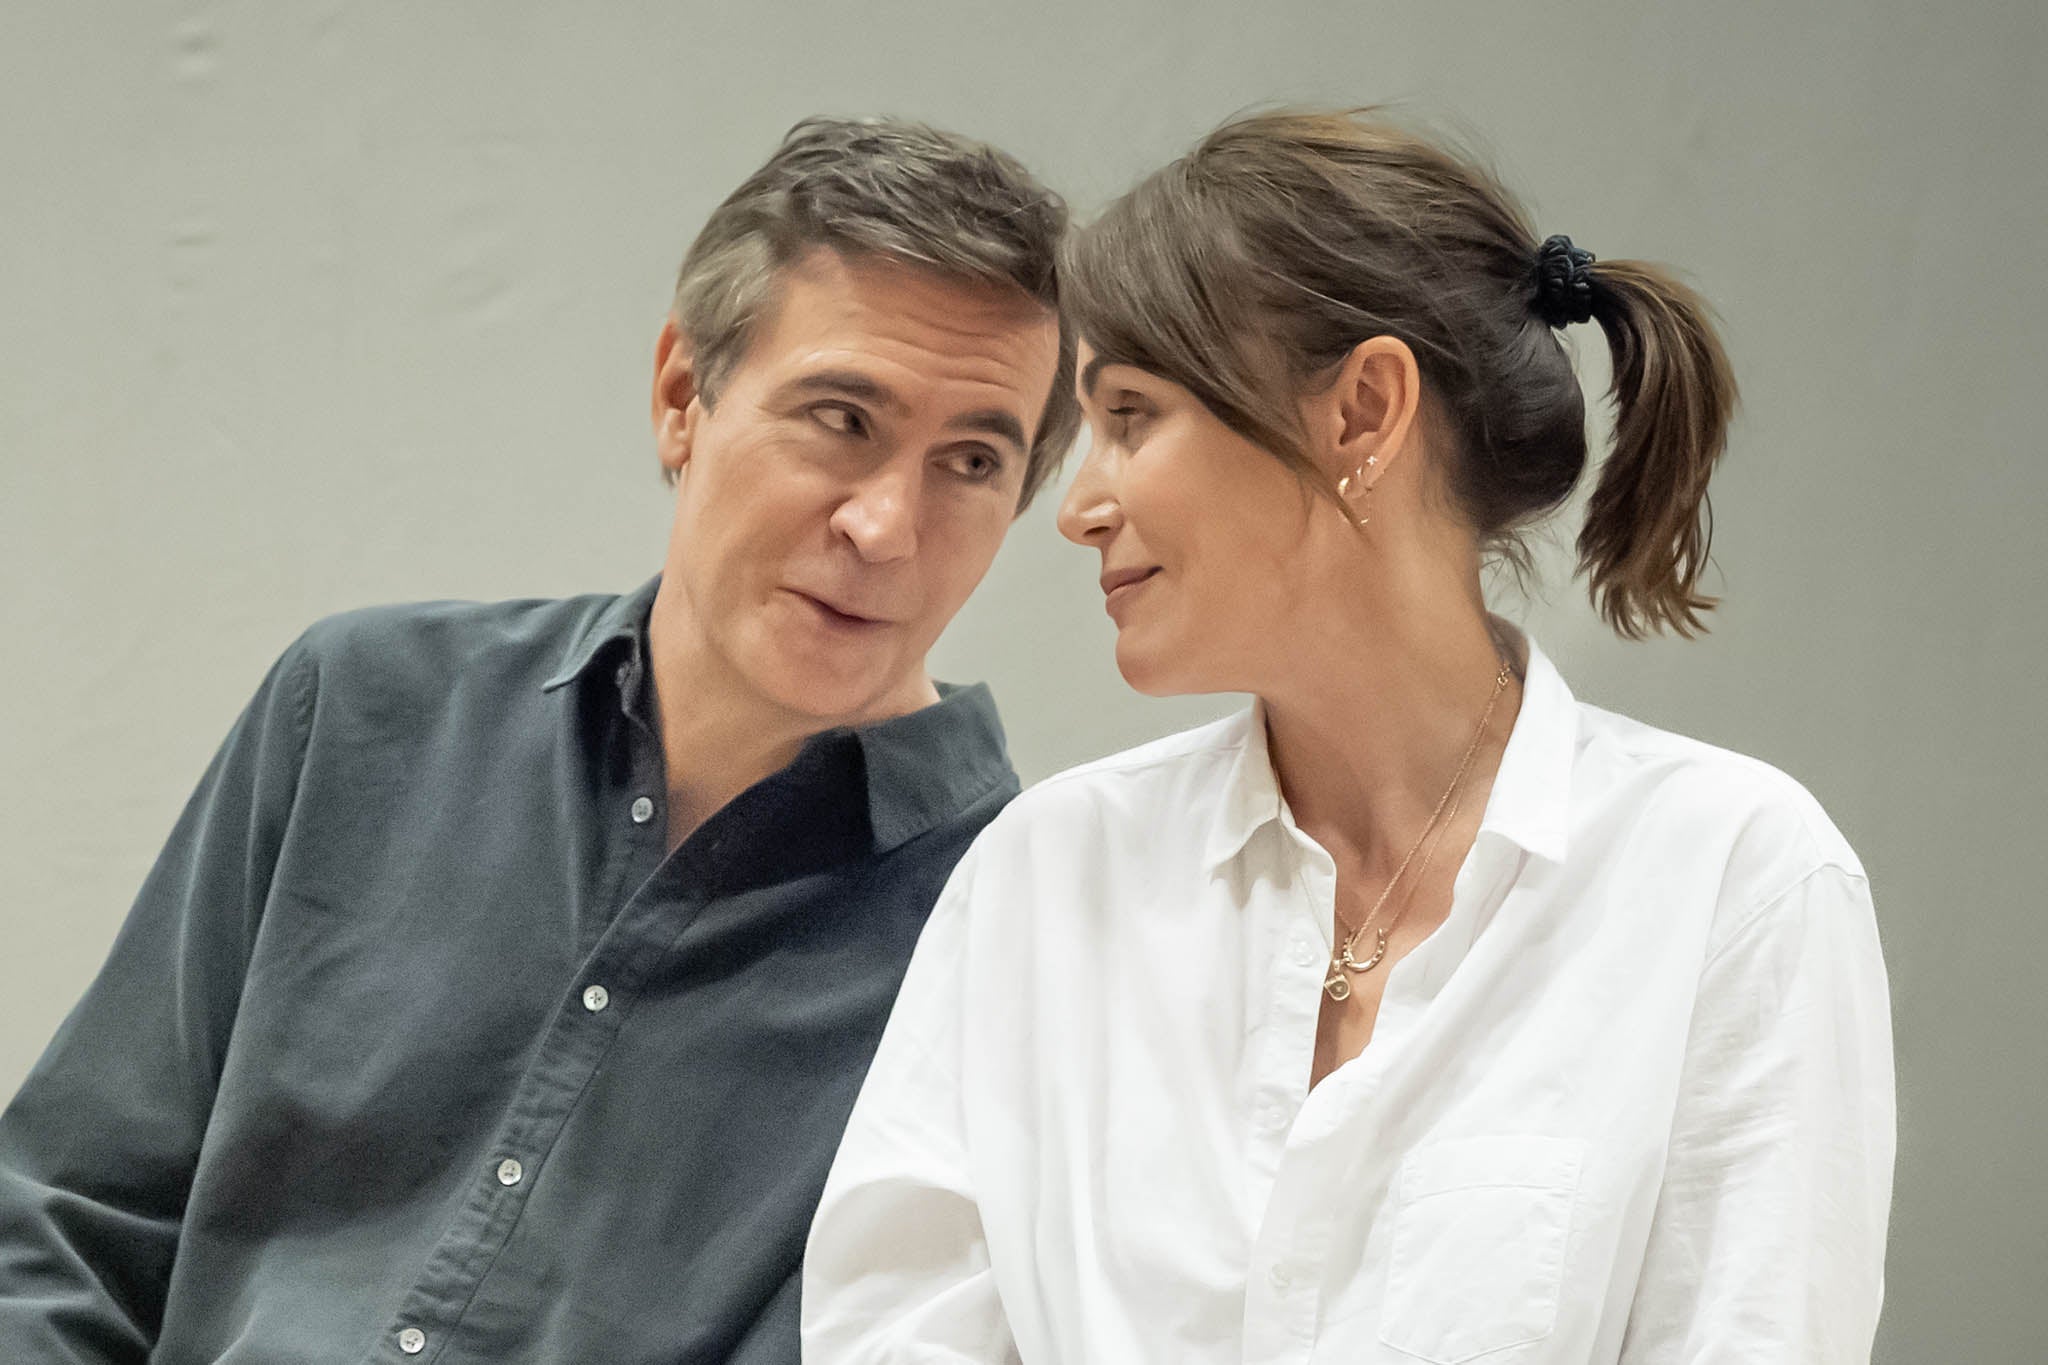 Part polemic, part romance: Davenport and Keeley Hawes in rehearsals for ‘The Human Body’